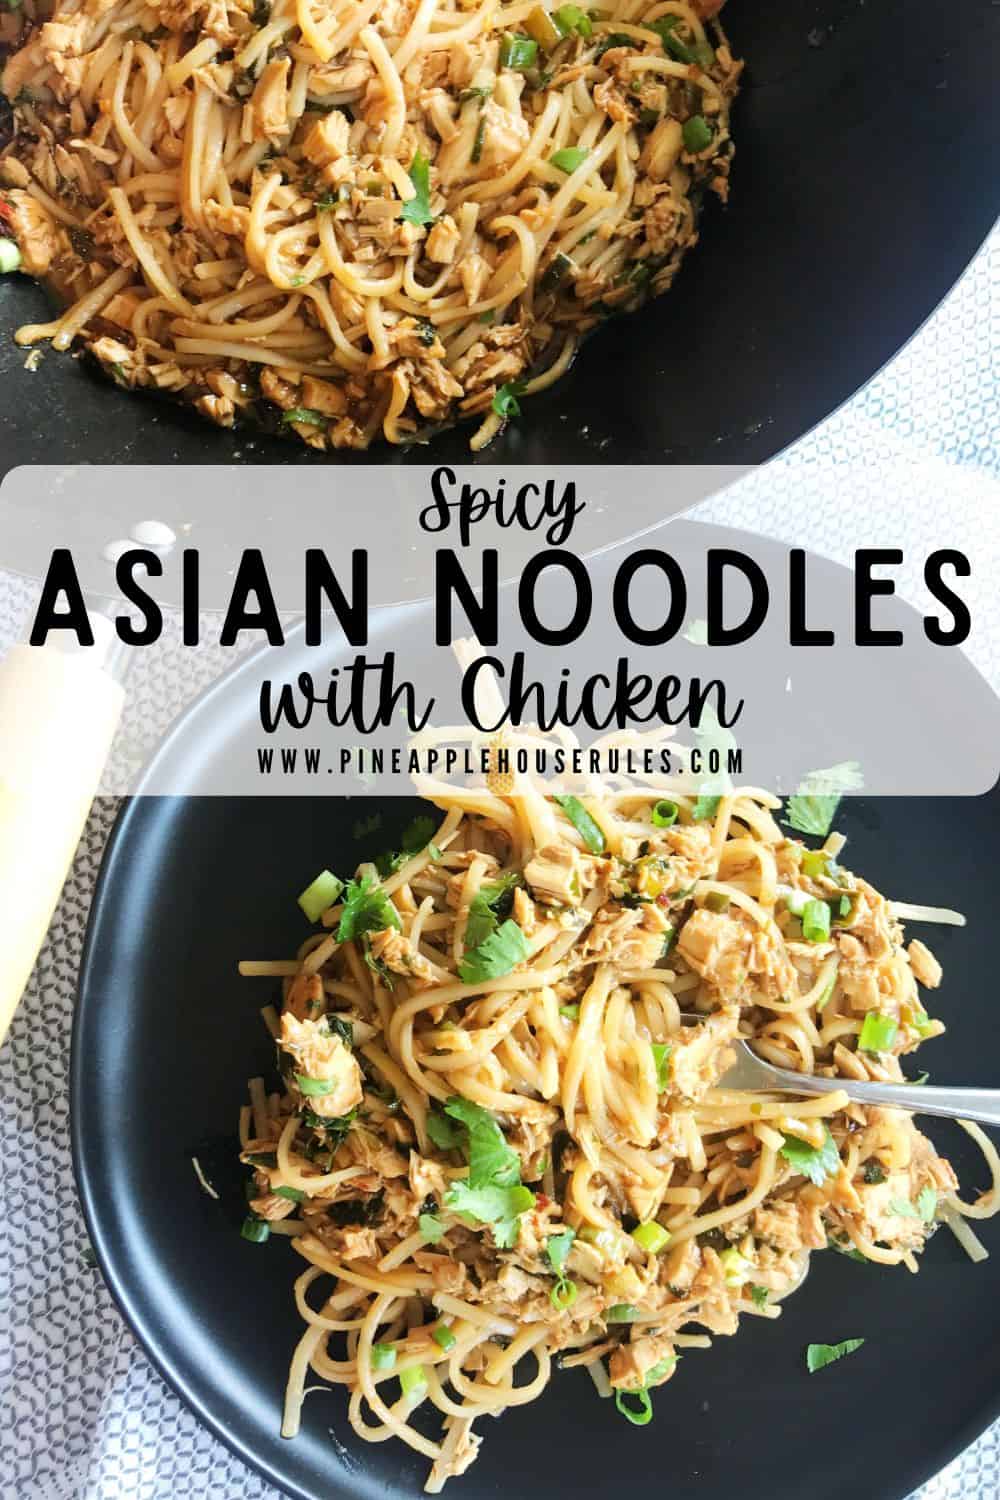 Spicy Asian Noodles with Chicken is a delicious, easy dinner recipe that's healthy and can even be Gluten Free! Spicy Asian Noodles with Chicken | Asian Noodles | Asian Noodles Recipe | Asian Noodles with Chicken | Asian Noodles Sauce | Asian Noodles Stir Fry | Rice Noodle Recipes | Rice Noodle Recipes Easy | Rice Noodle Dishes | Rice Noodle Bowl | Rice Noodle Meal Prep | Gluten Free Recipes | Easy Healthy Dinner Ideas | Dinner Recipes Healthy | Dinner Recipes Easy Healthy